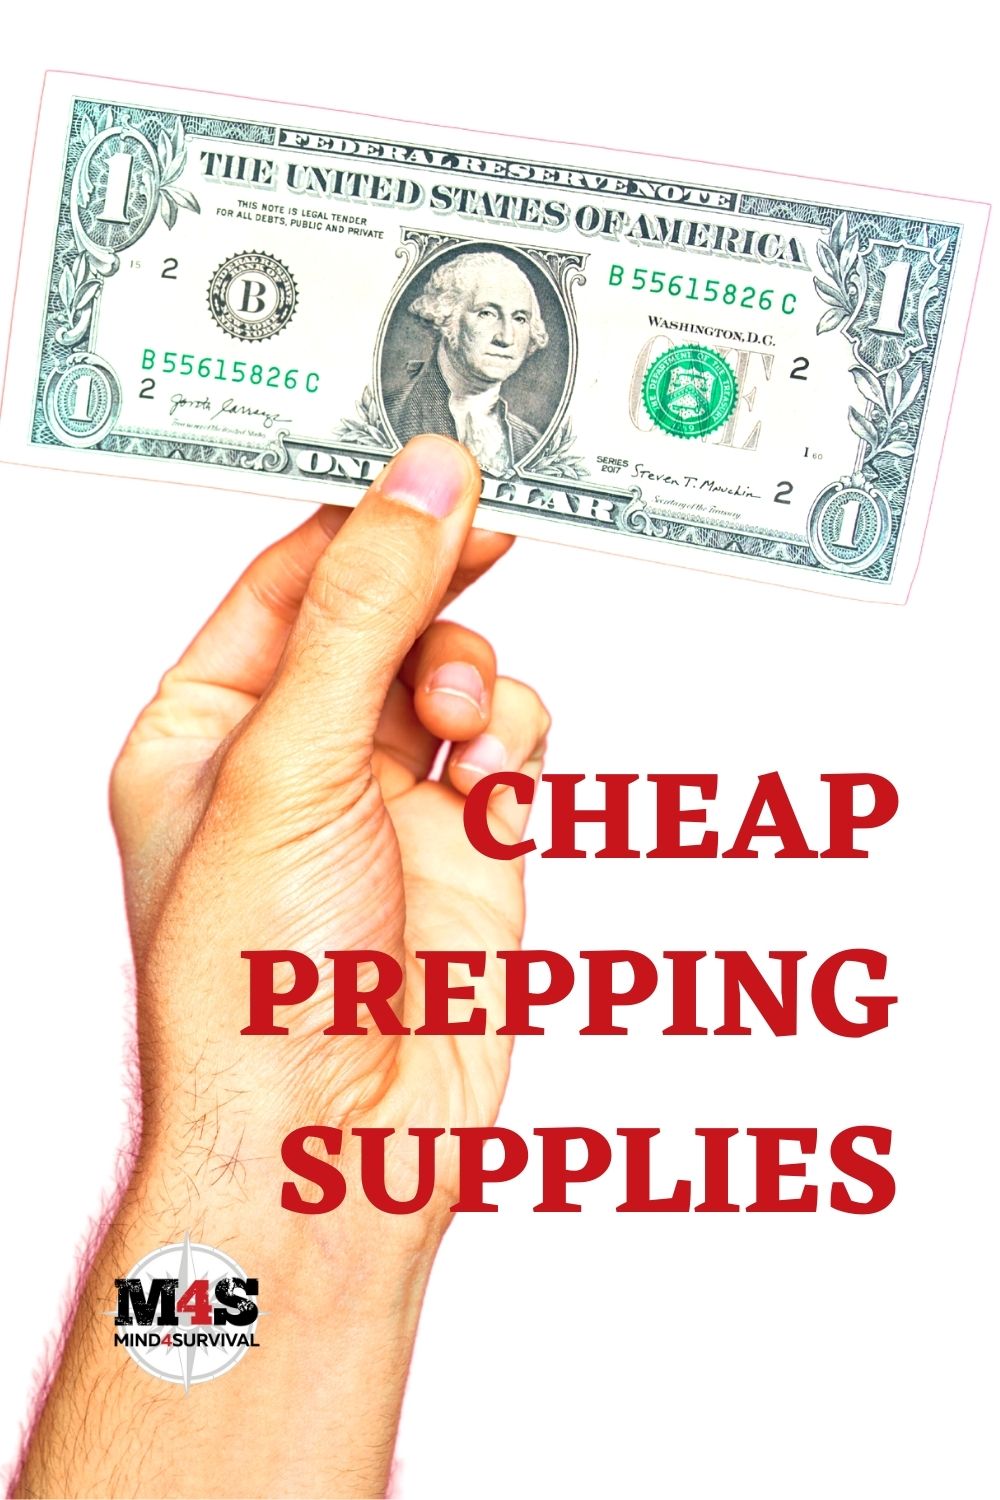 When to Get Cheap Prepping Supplies (...And When to Splurge)